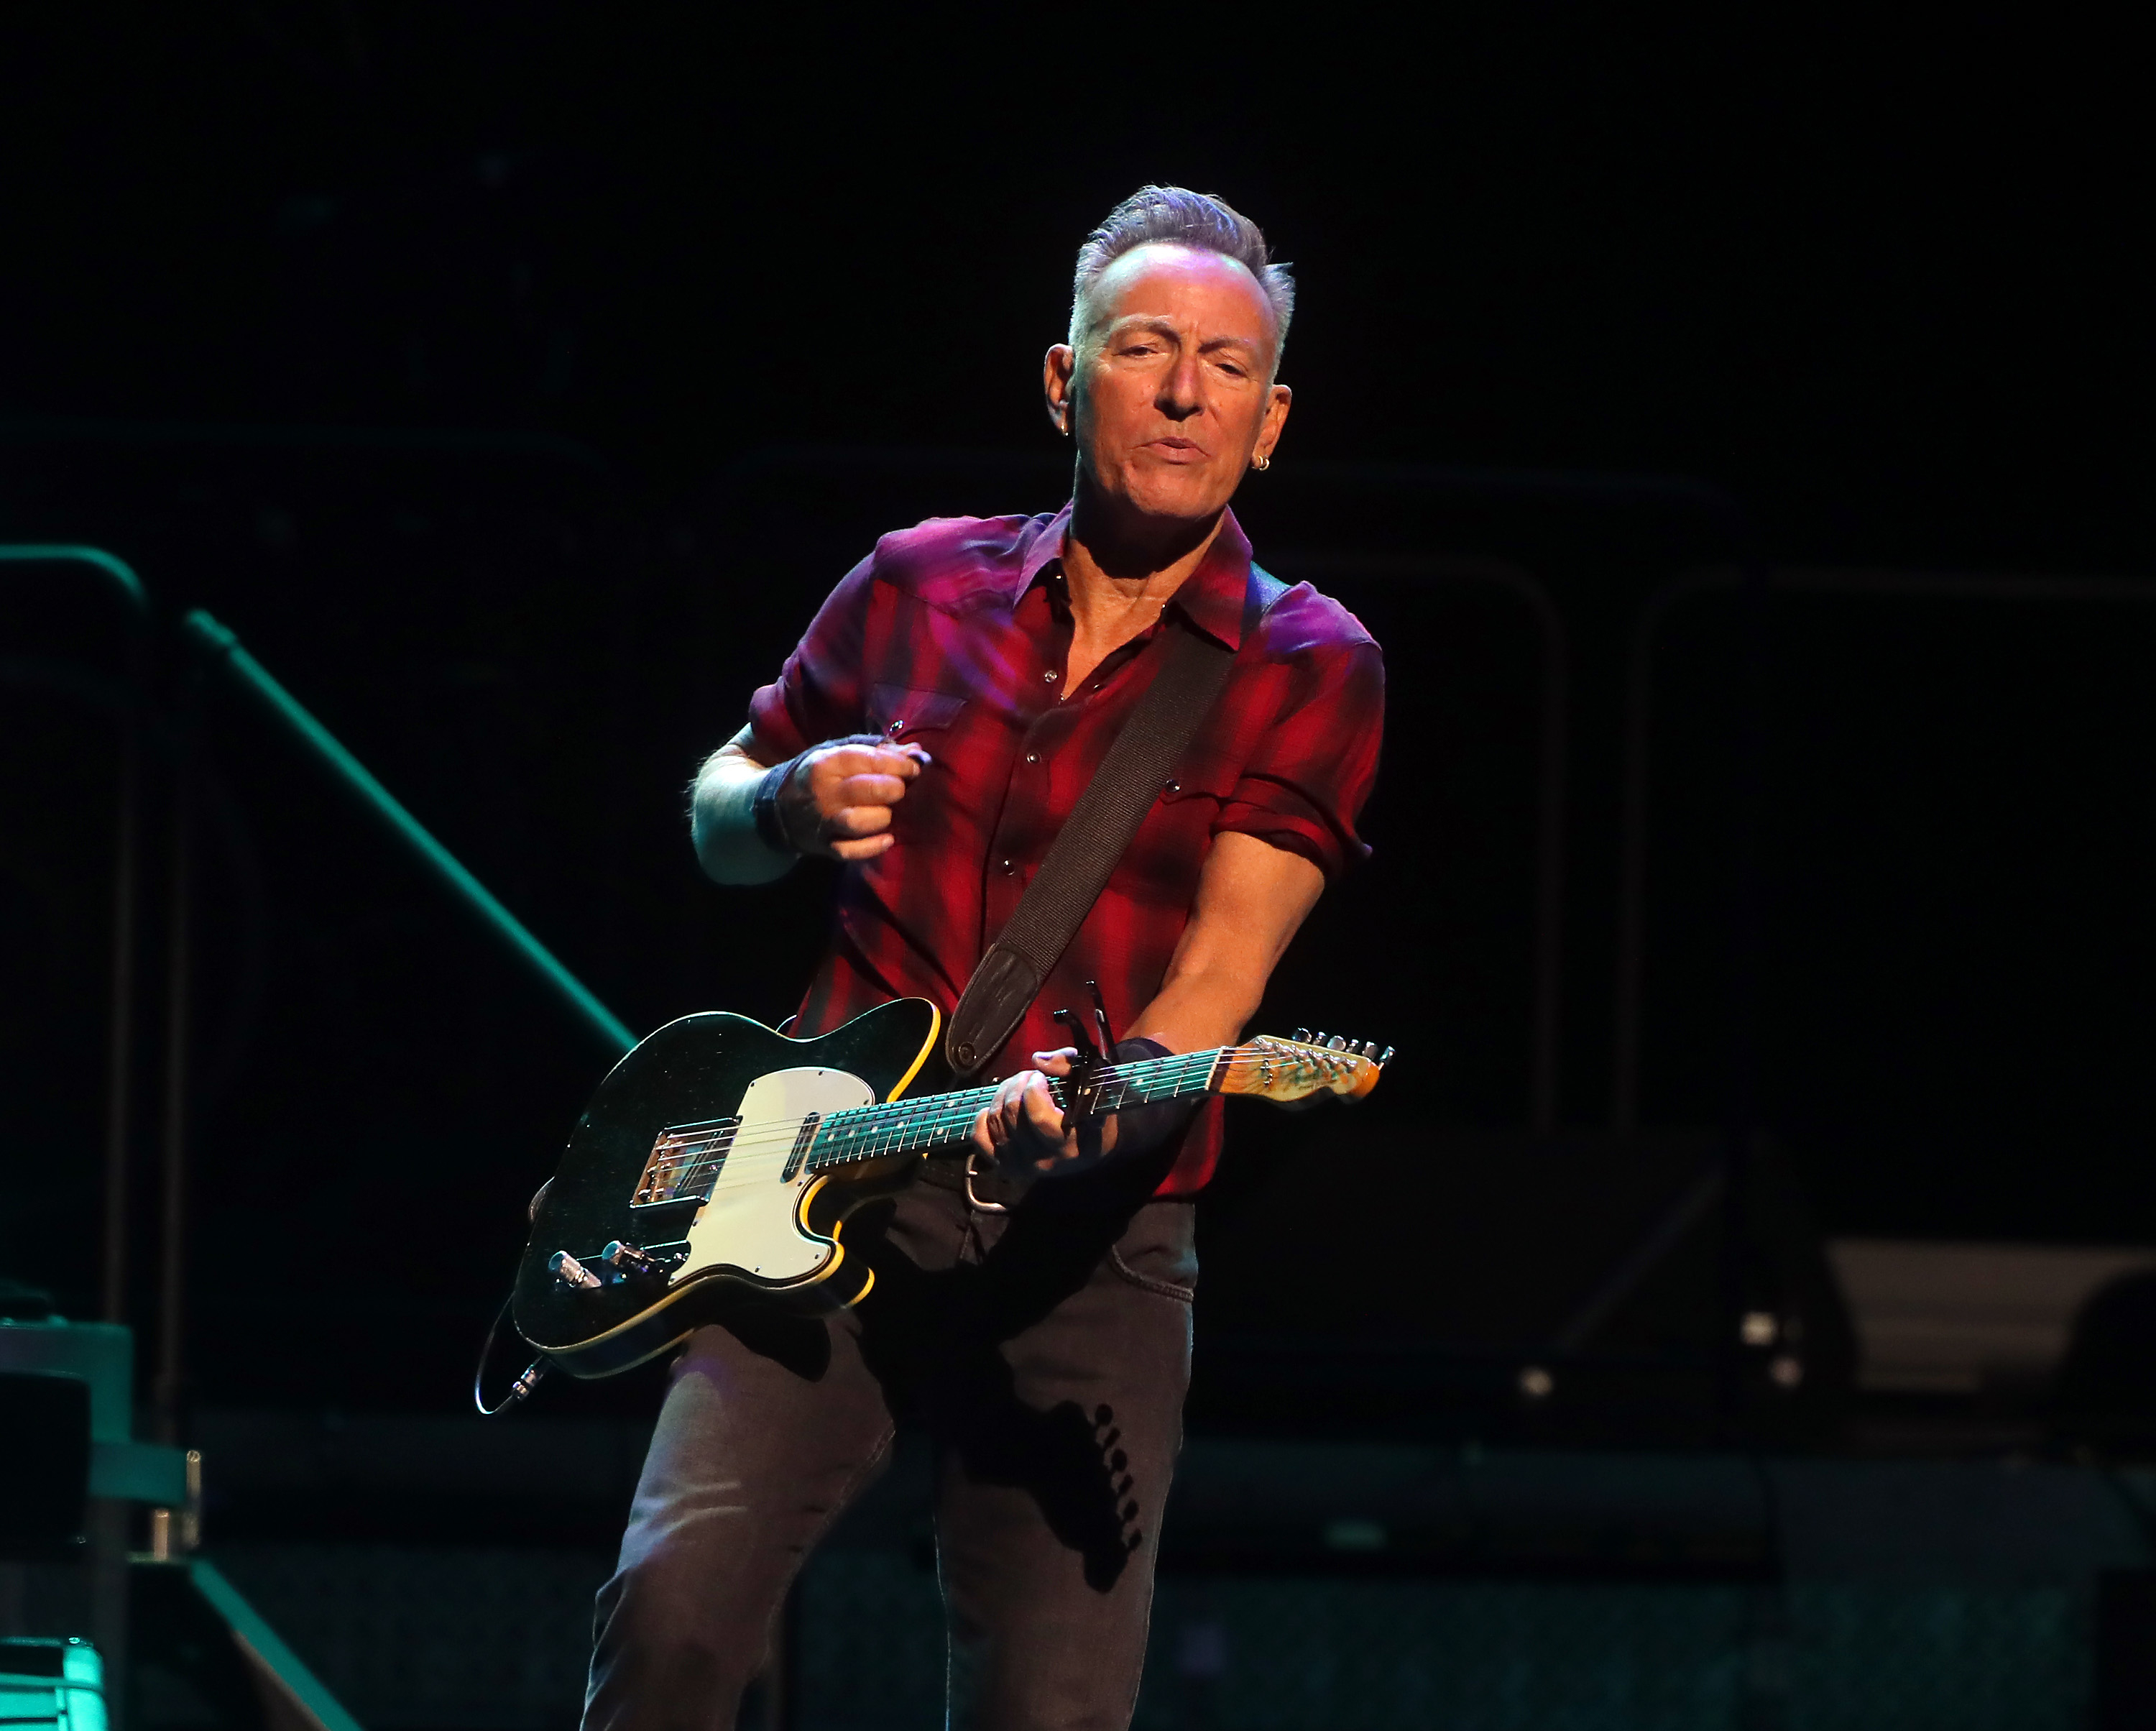 Bruce Springsteen plays an electric guitar on stage, wearing a short-sleeve, button-up shirt and jeans